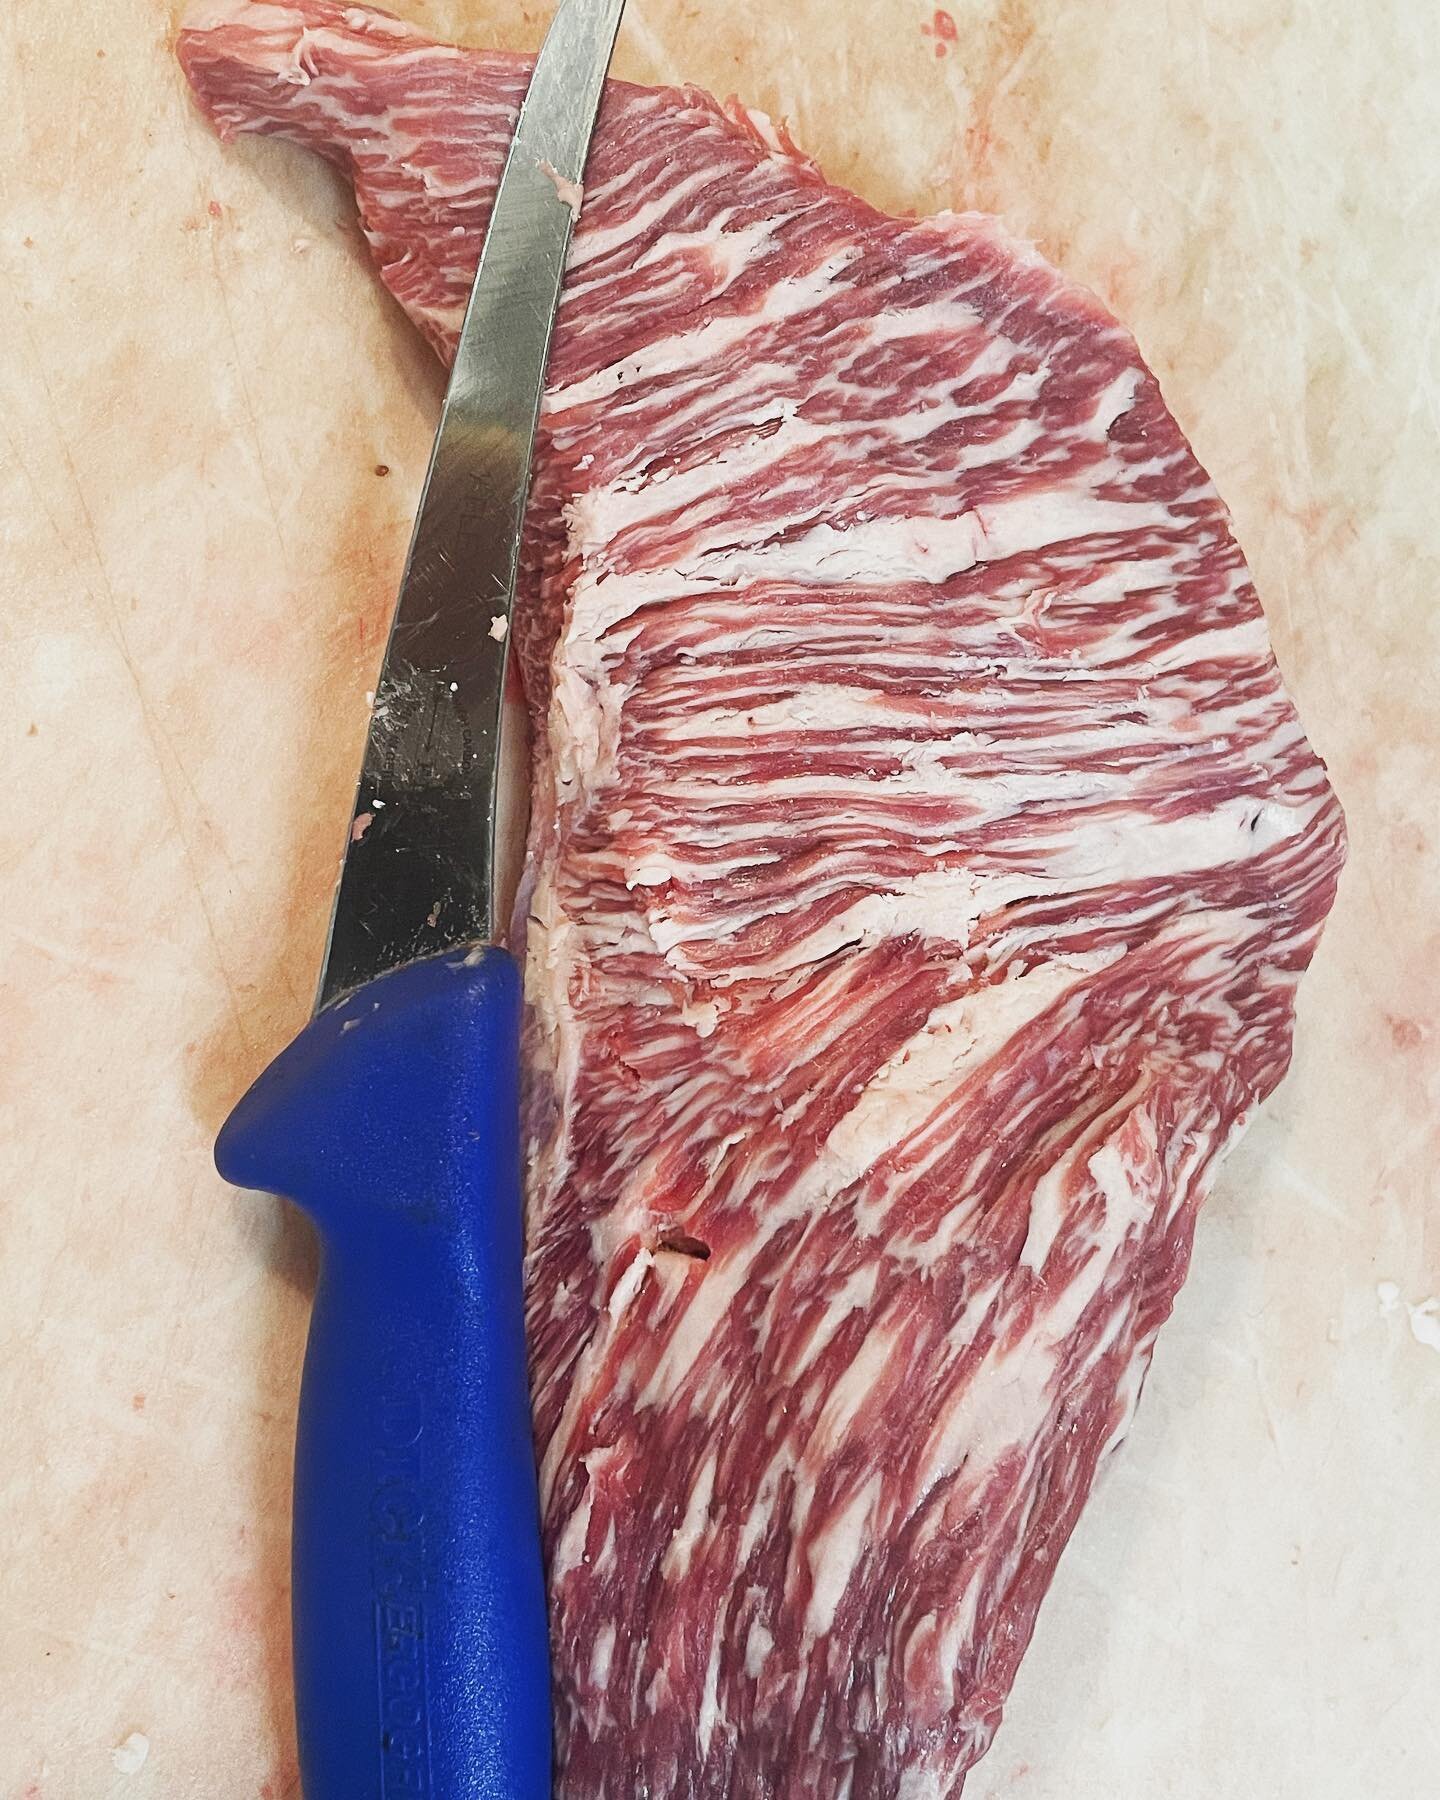 Hi quality ranch raised beef.

A few pics of a Black Angus steer we processed. The color and marbling were tremendous. A few favorites to share with you were the Tri Tip, Flap Meat, Rump Roast and Short Ribs. 

The cooler weather will lead me to thin